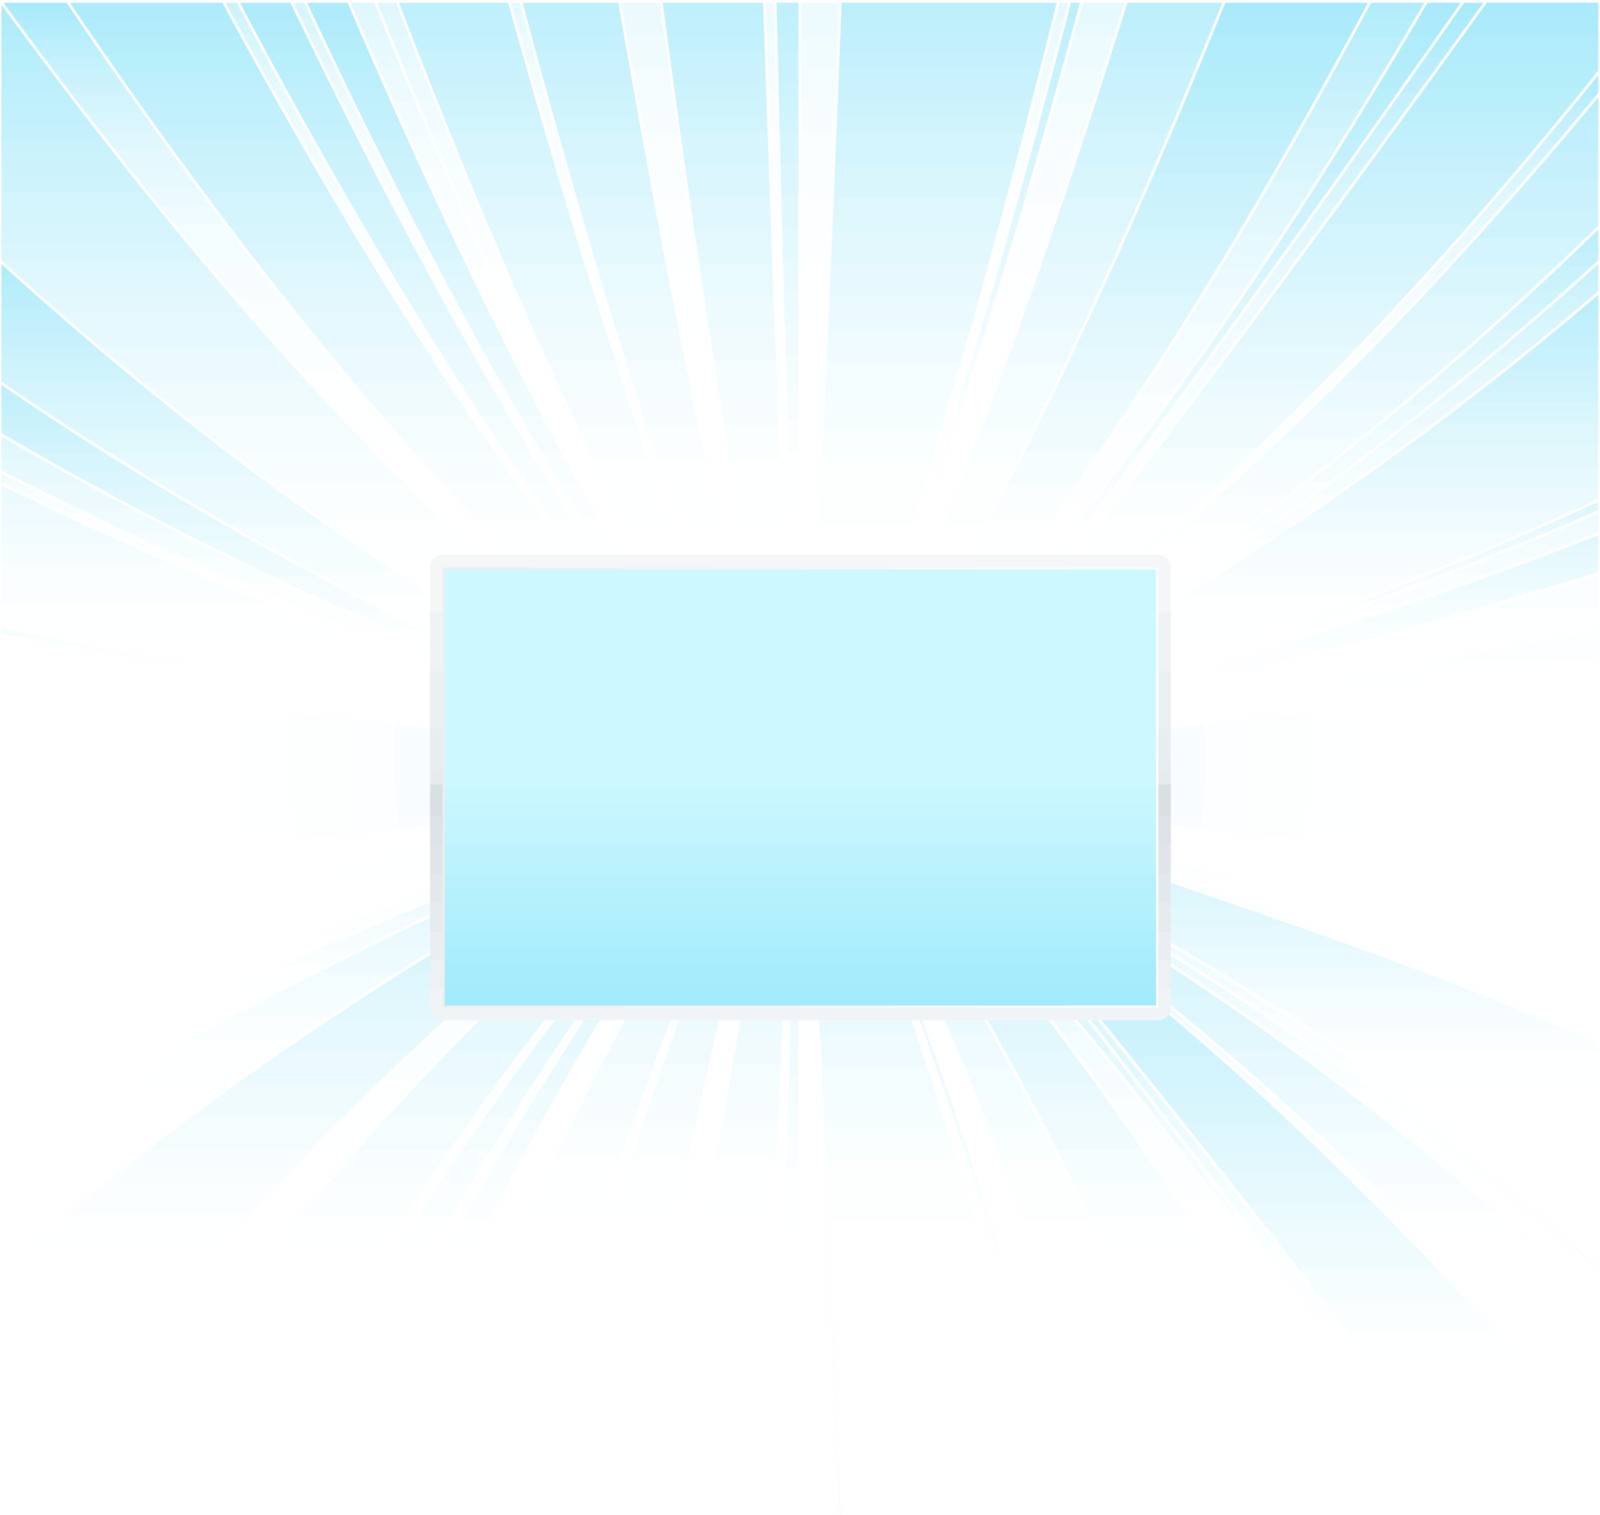 Vector illustration of a beautiful blue glowing background with central shiny board for custom elements.